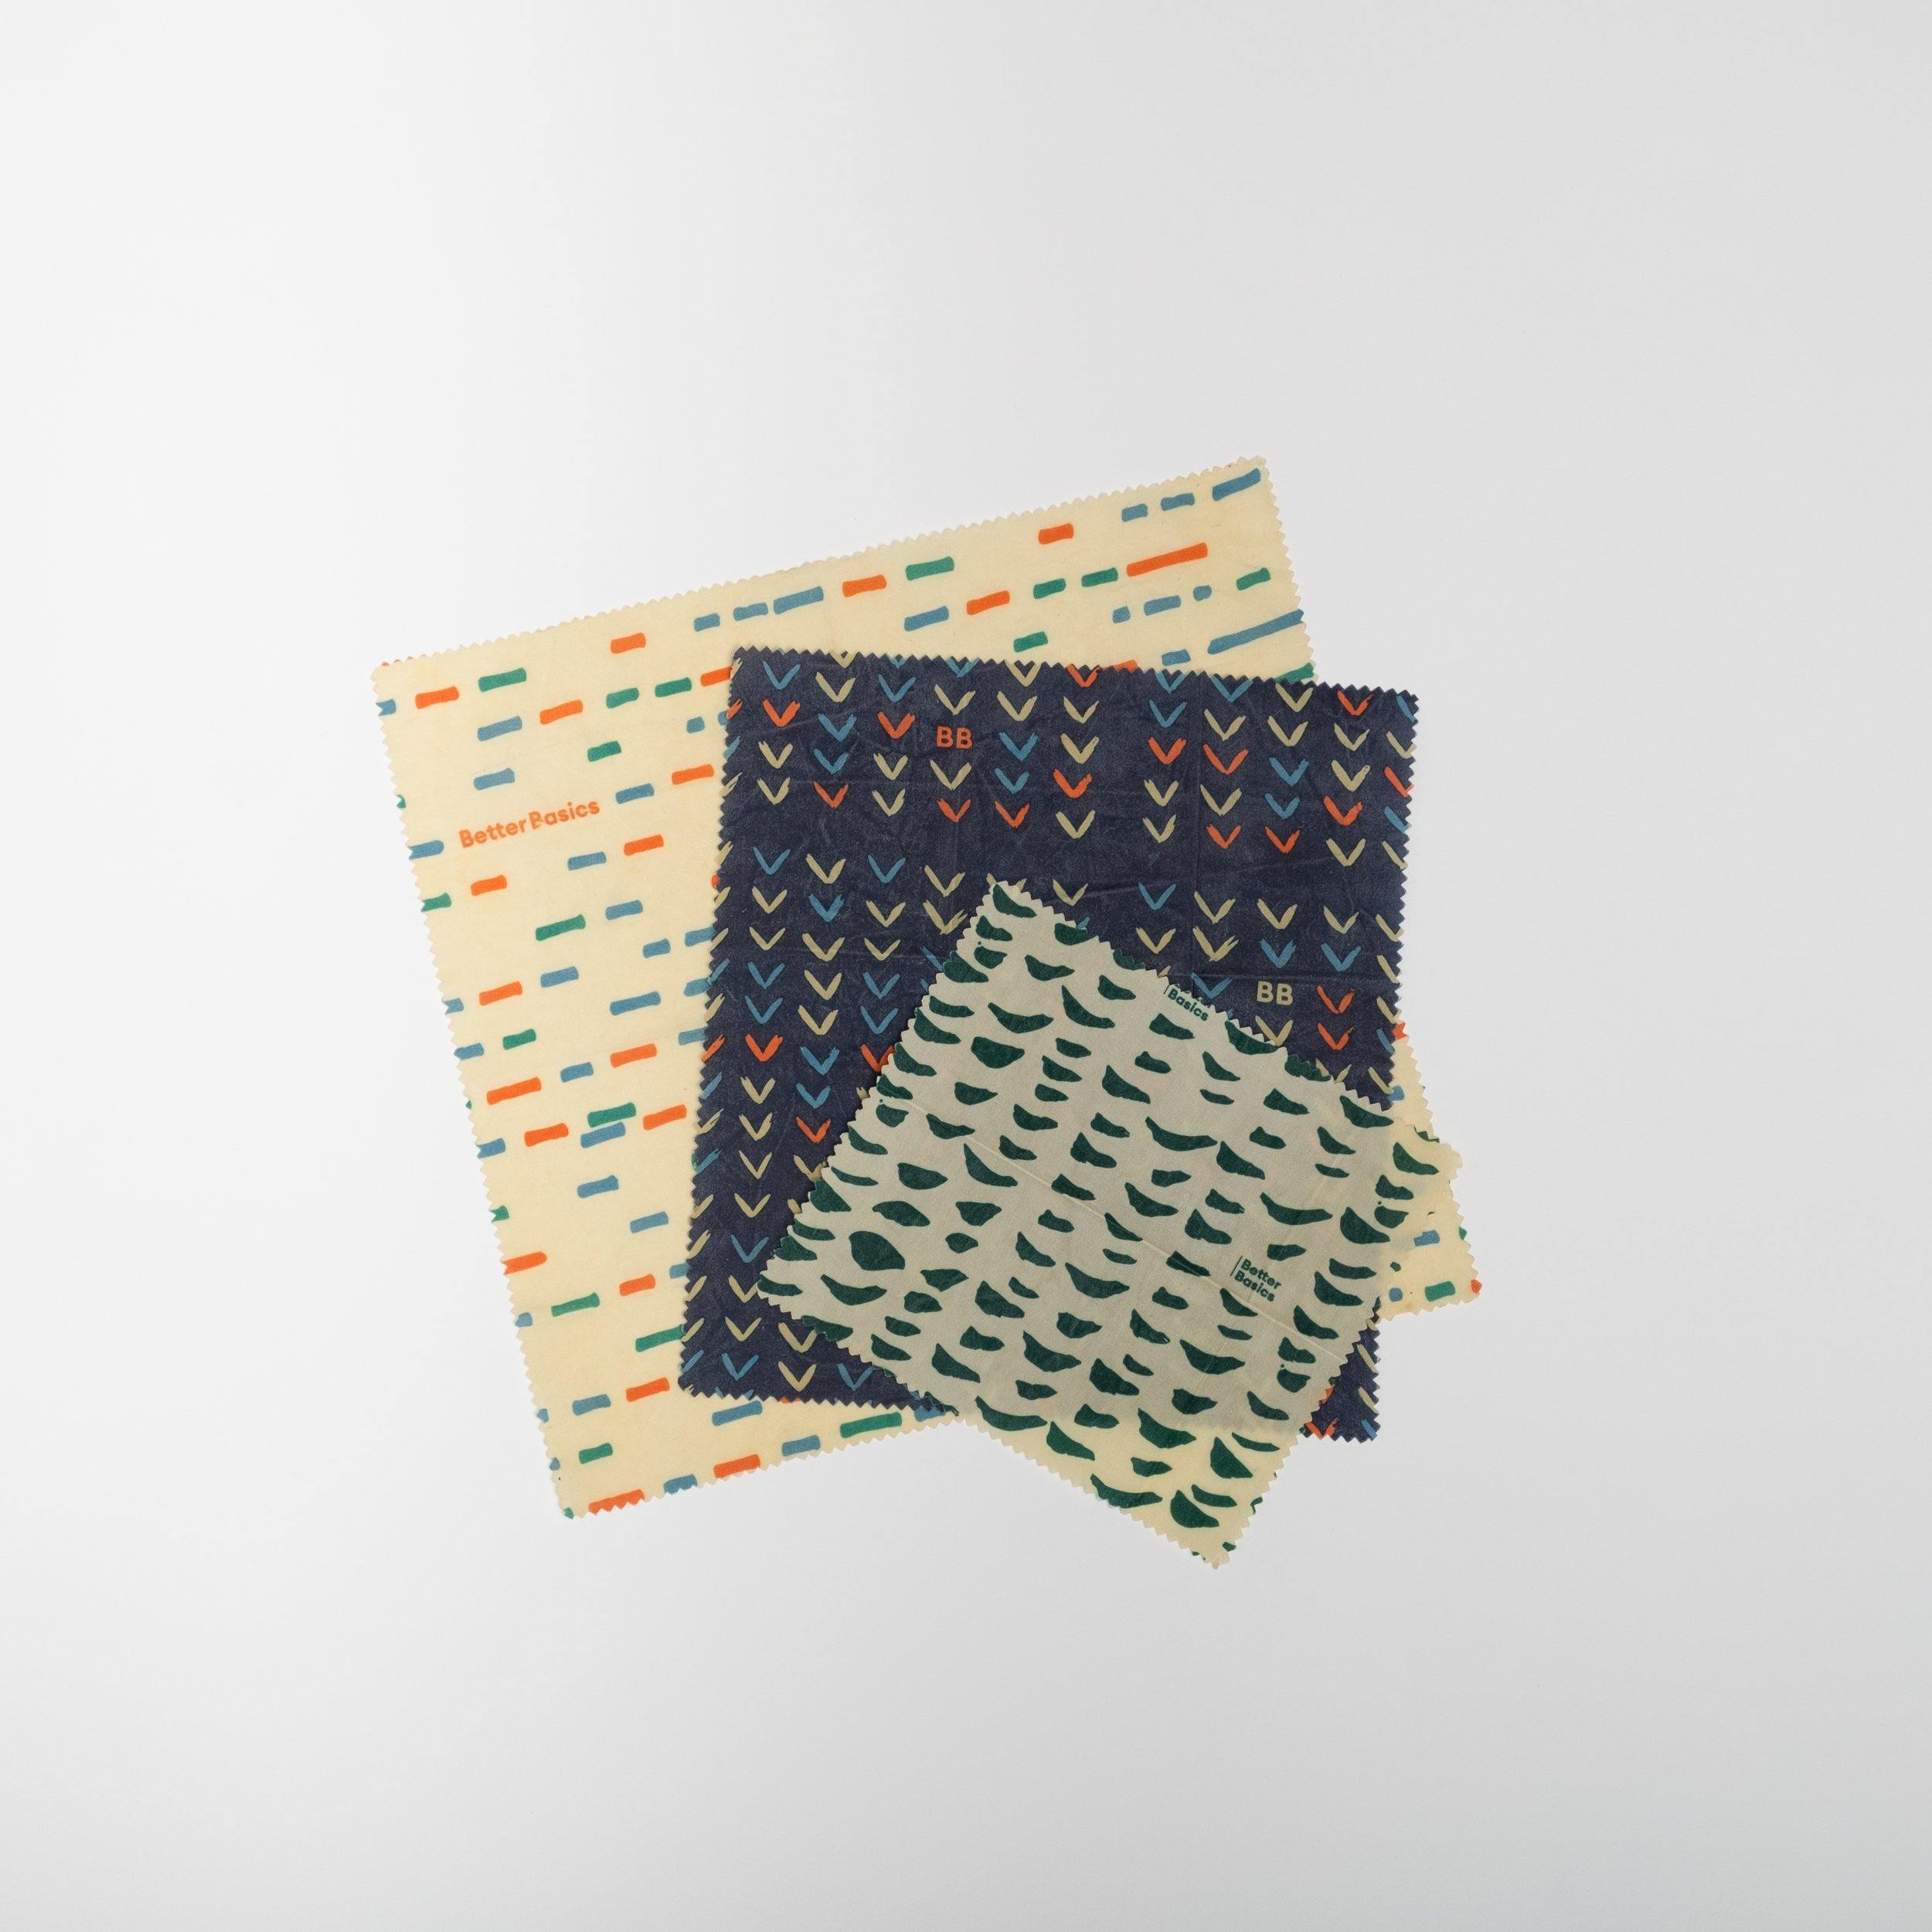 Bee Well Beeswax Wrap - Kitchen - Better Basics Eco-Friendly Products - Vancouver Canada